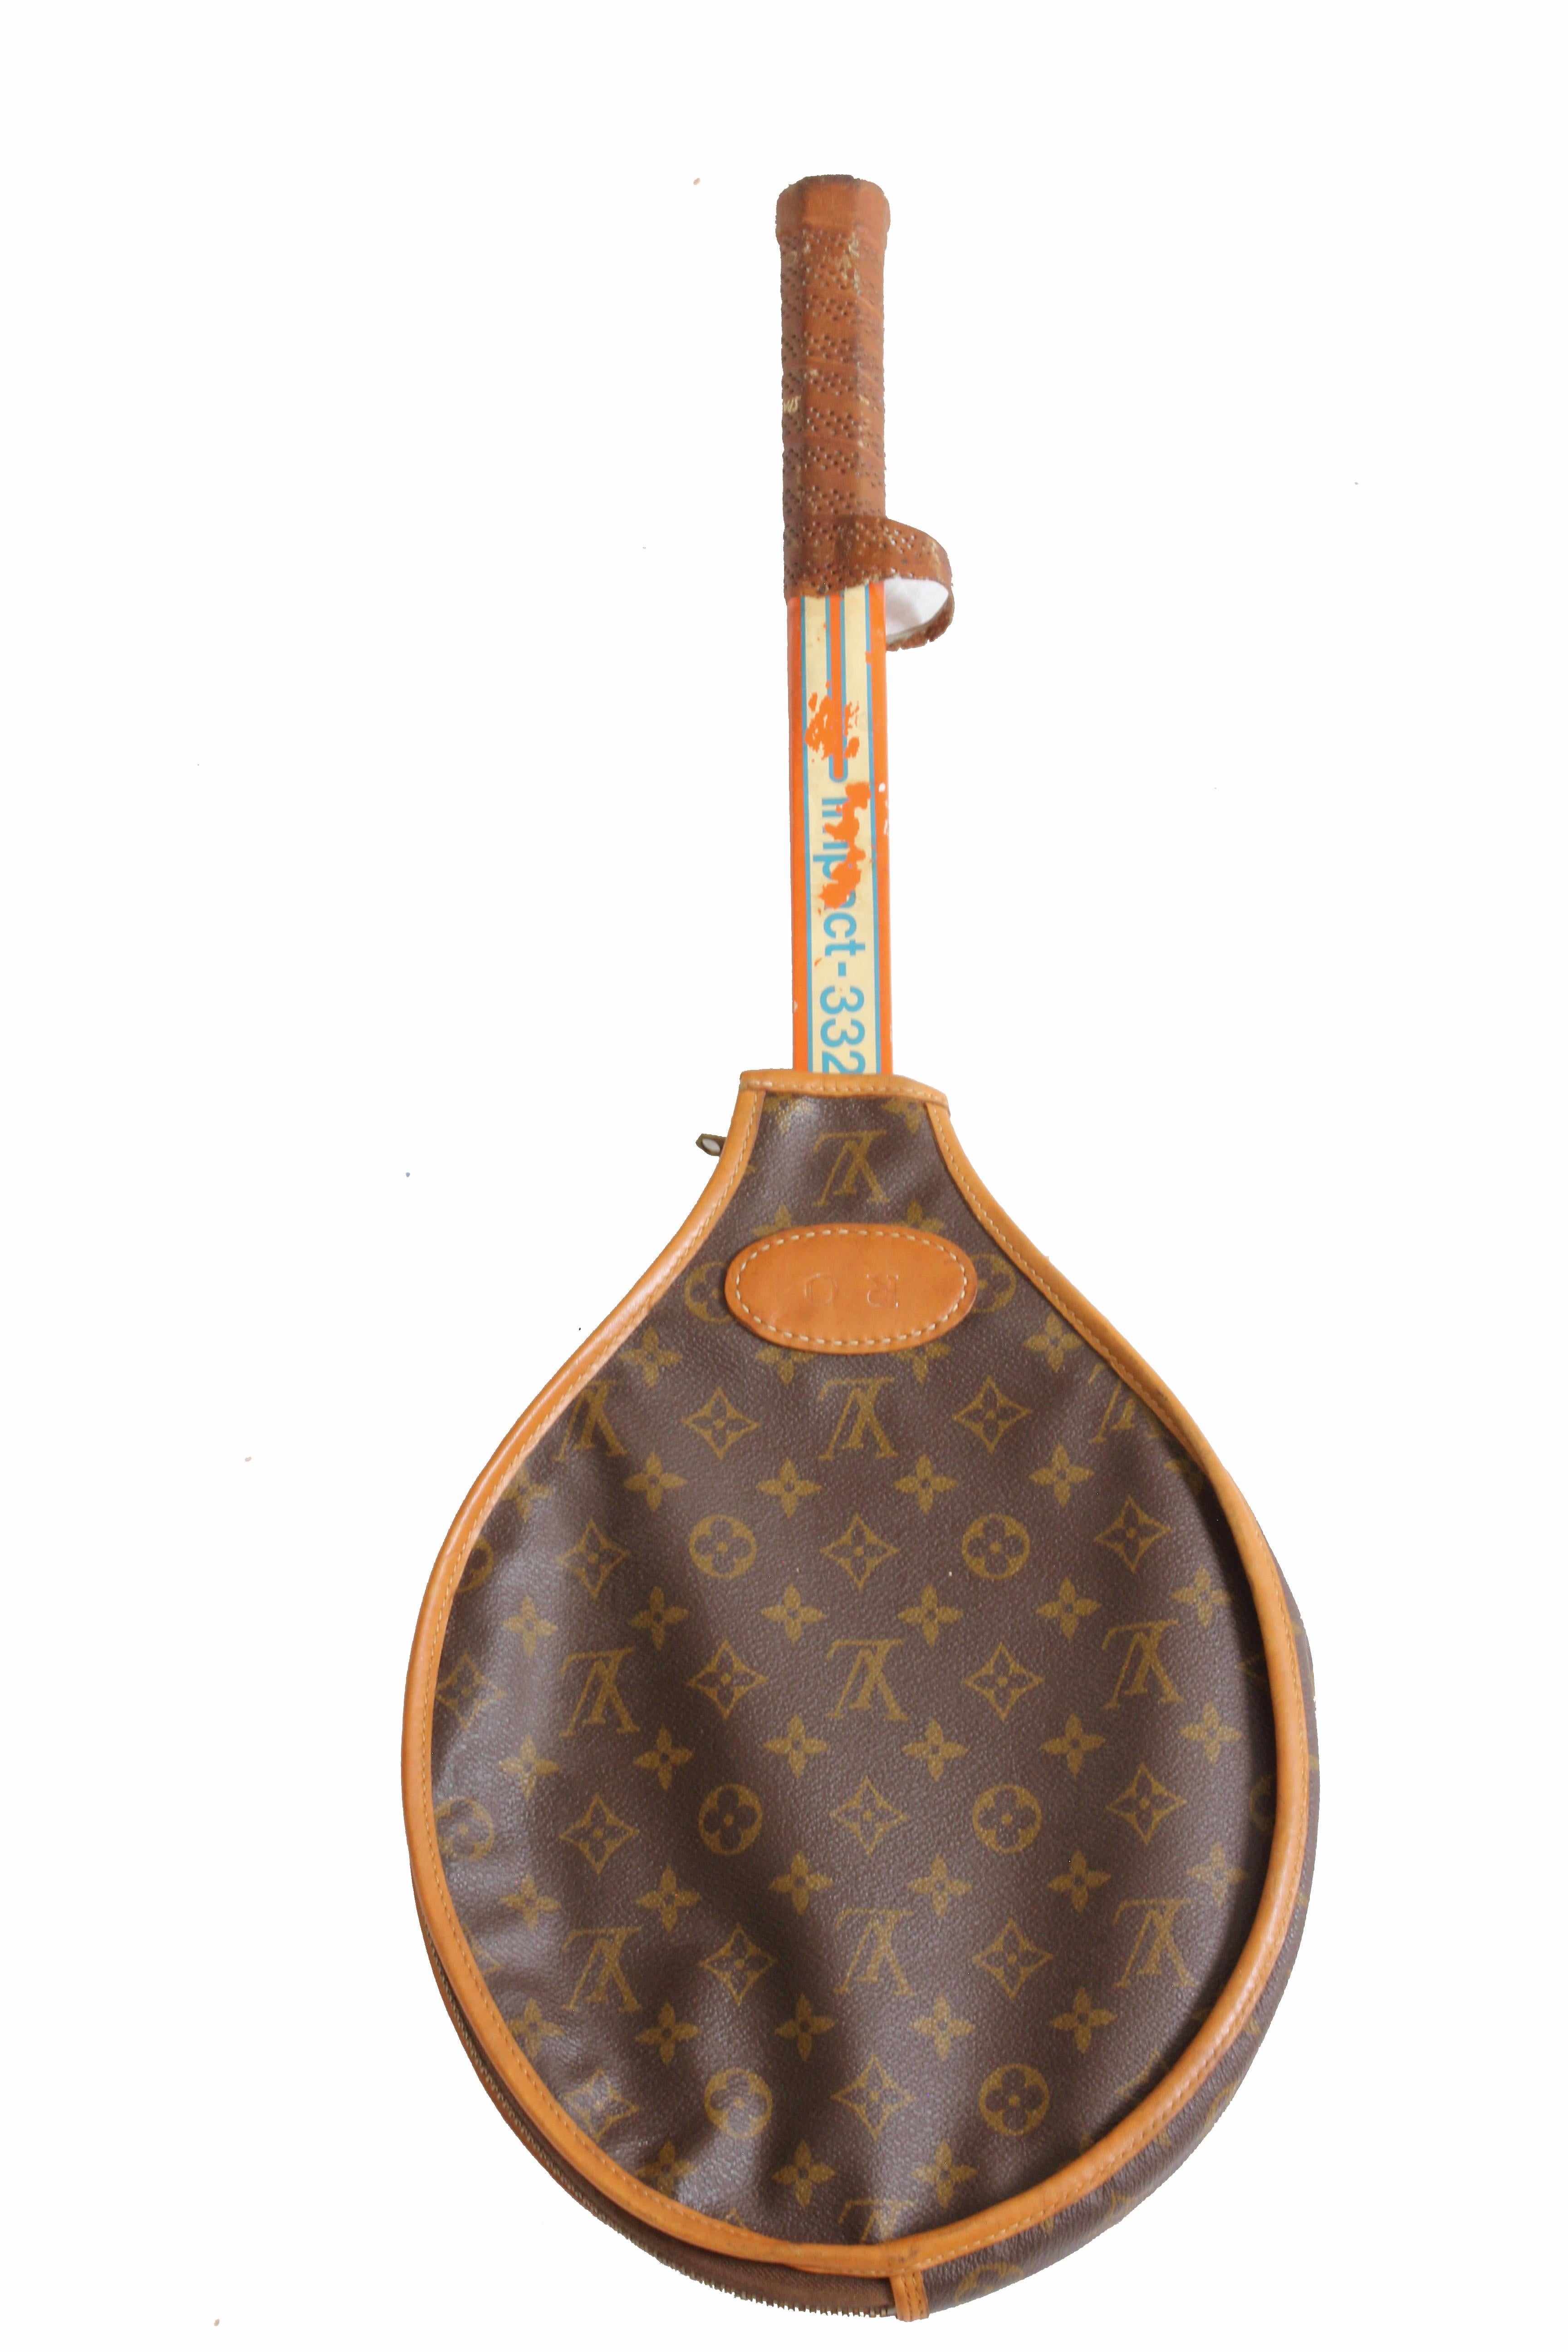 Here's a great vintage piece for the tennis aficionado or interior decorator - a Louis Vuitton tennis racquet cover, made under special license by The French Company and sold by high end retailers such as Saks and Neimans from the 70s through the